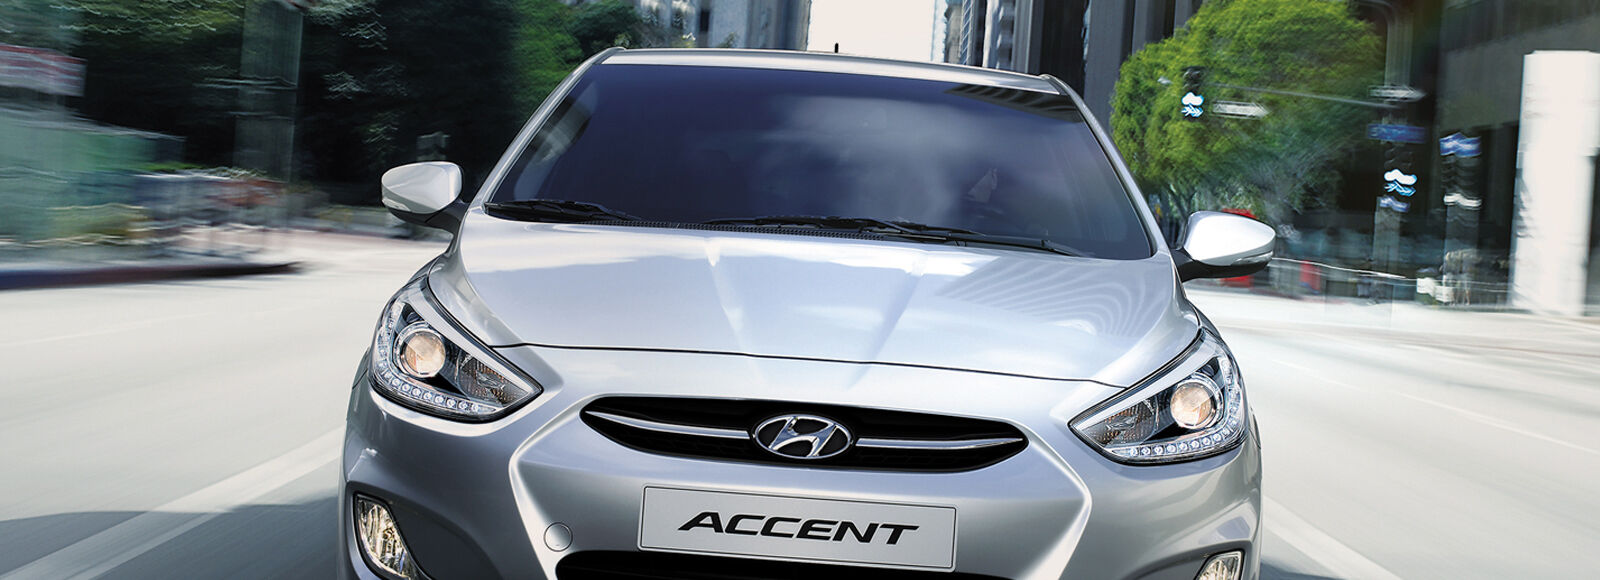 Accent 5dr Design Front View Silver Driving Road Pc 